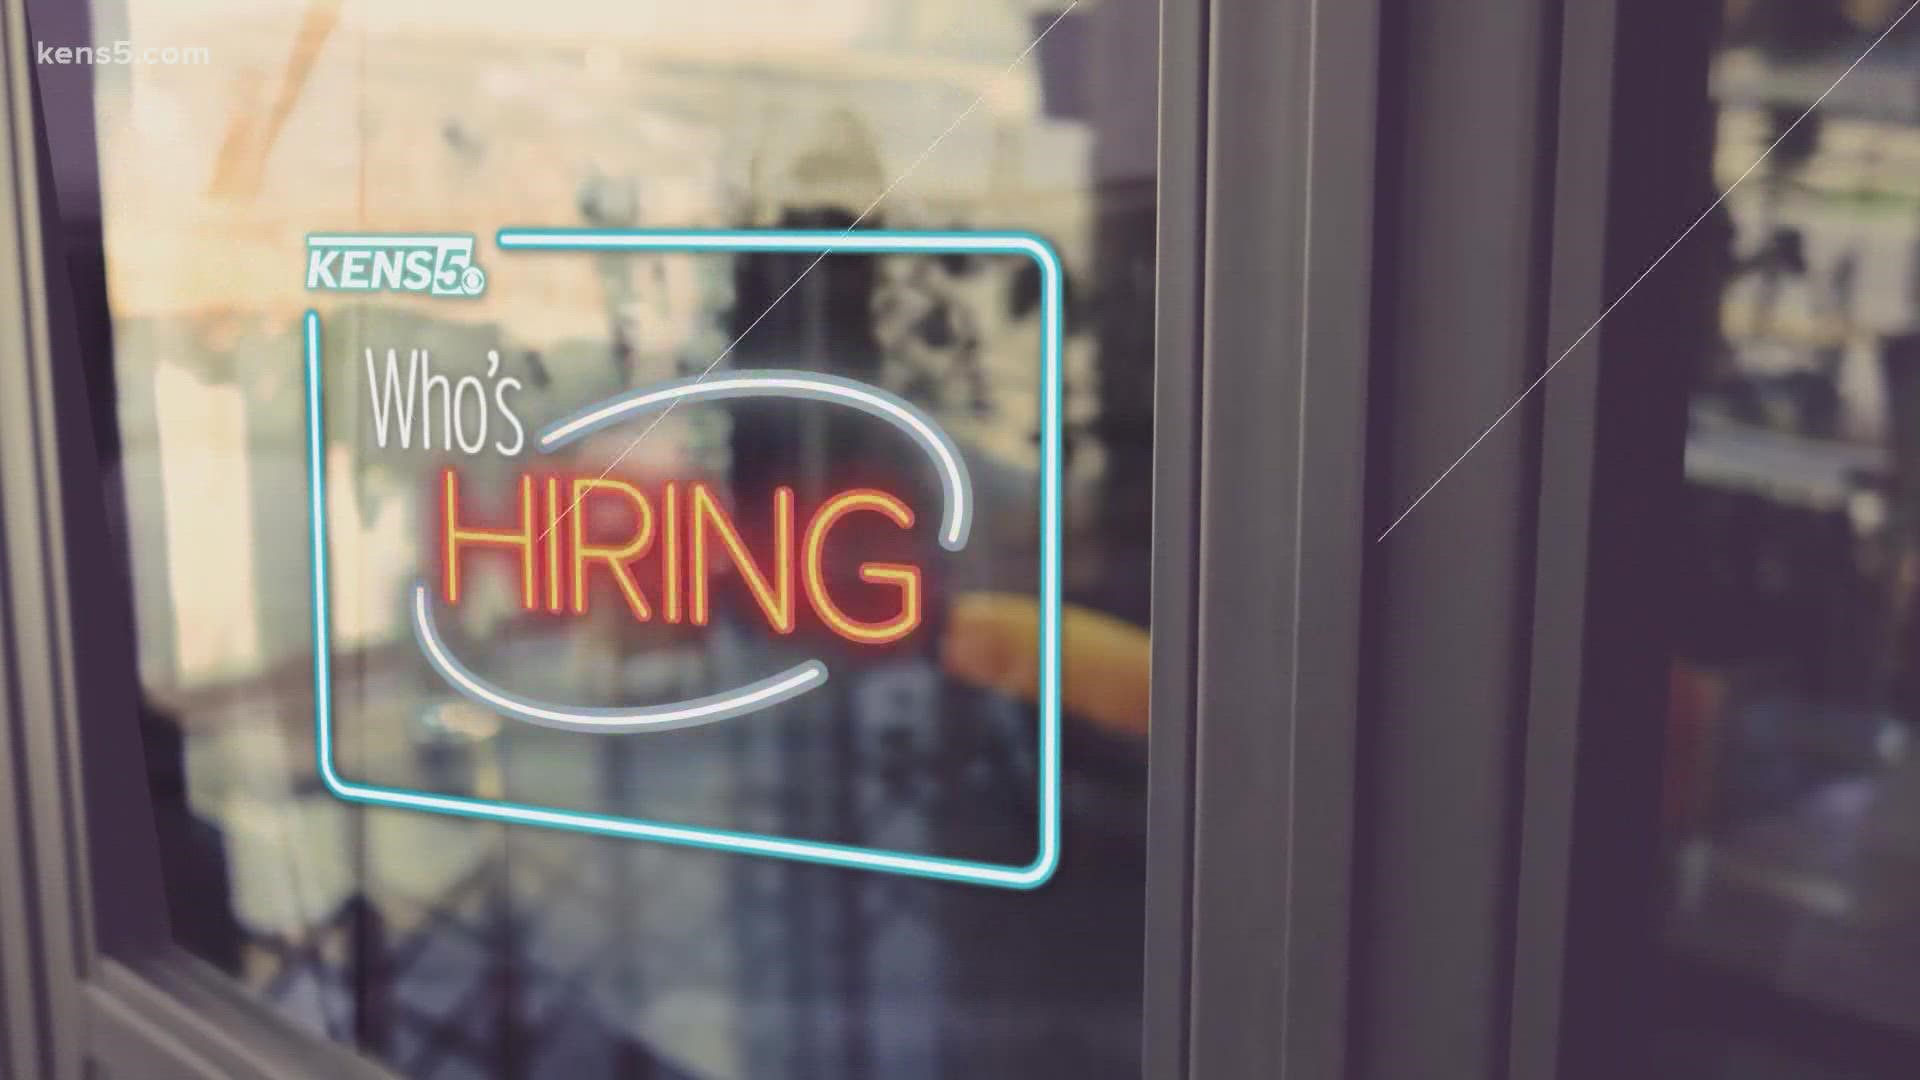 Here's a list of jobs hiring in the San Antonio area!